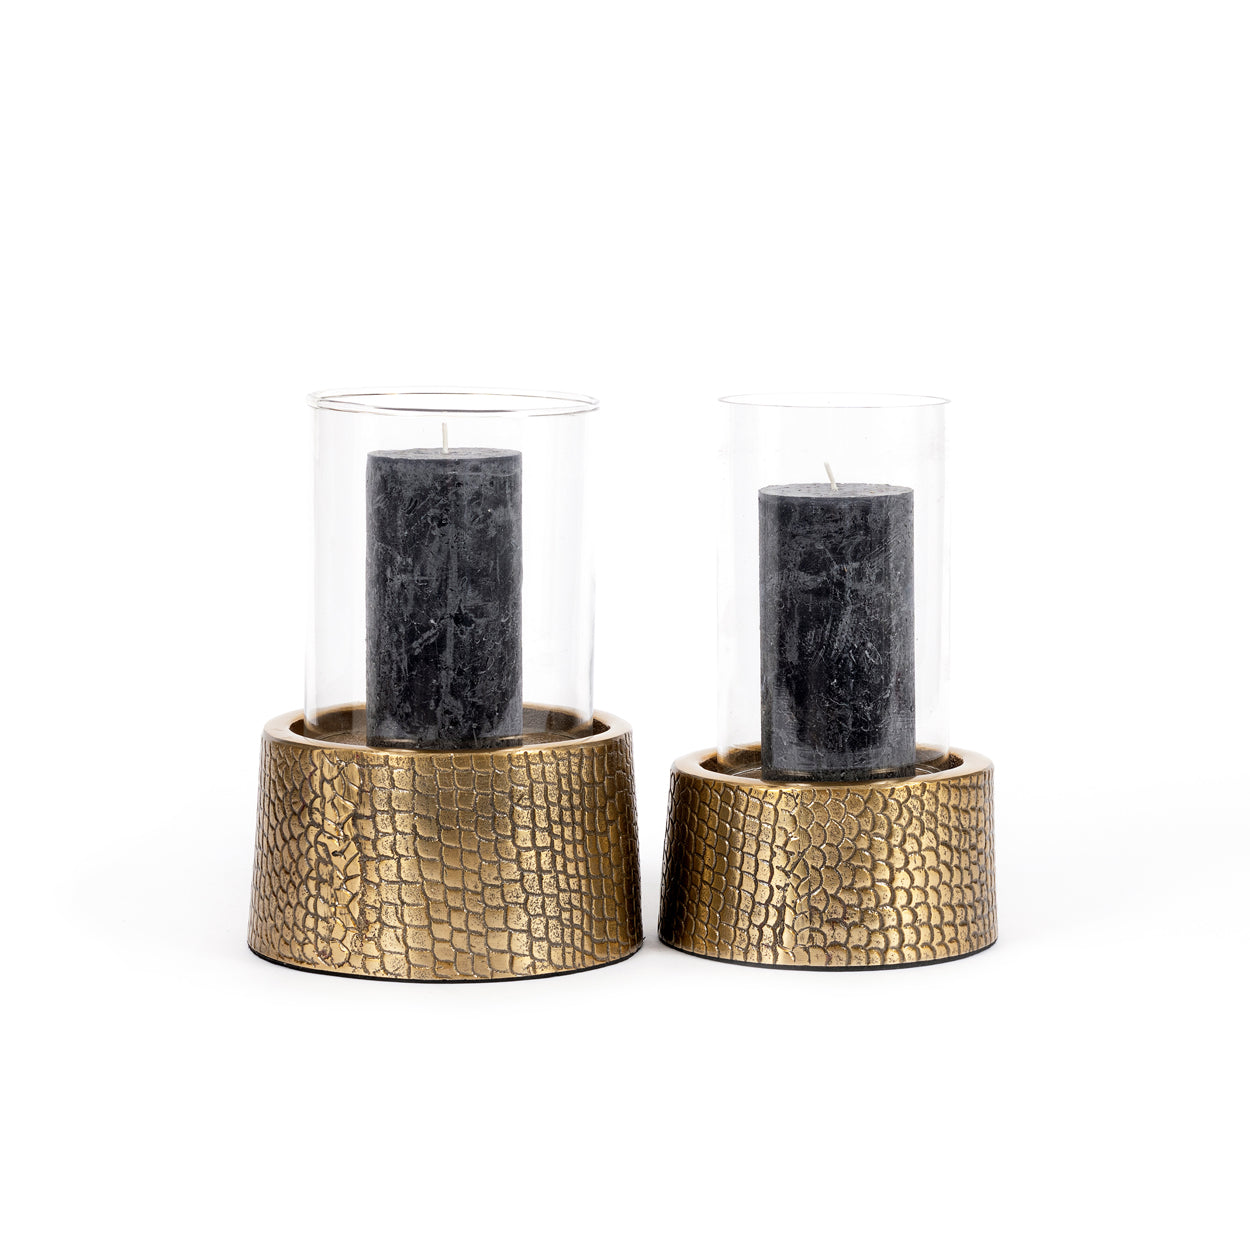 THE CROCO Candle Holder with Glass two pieces